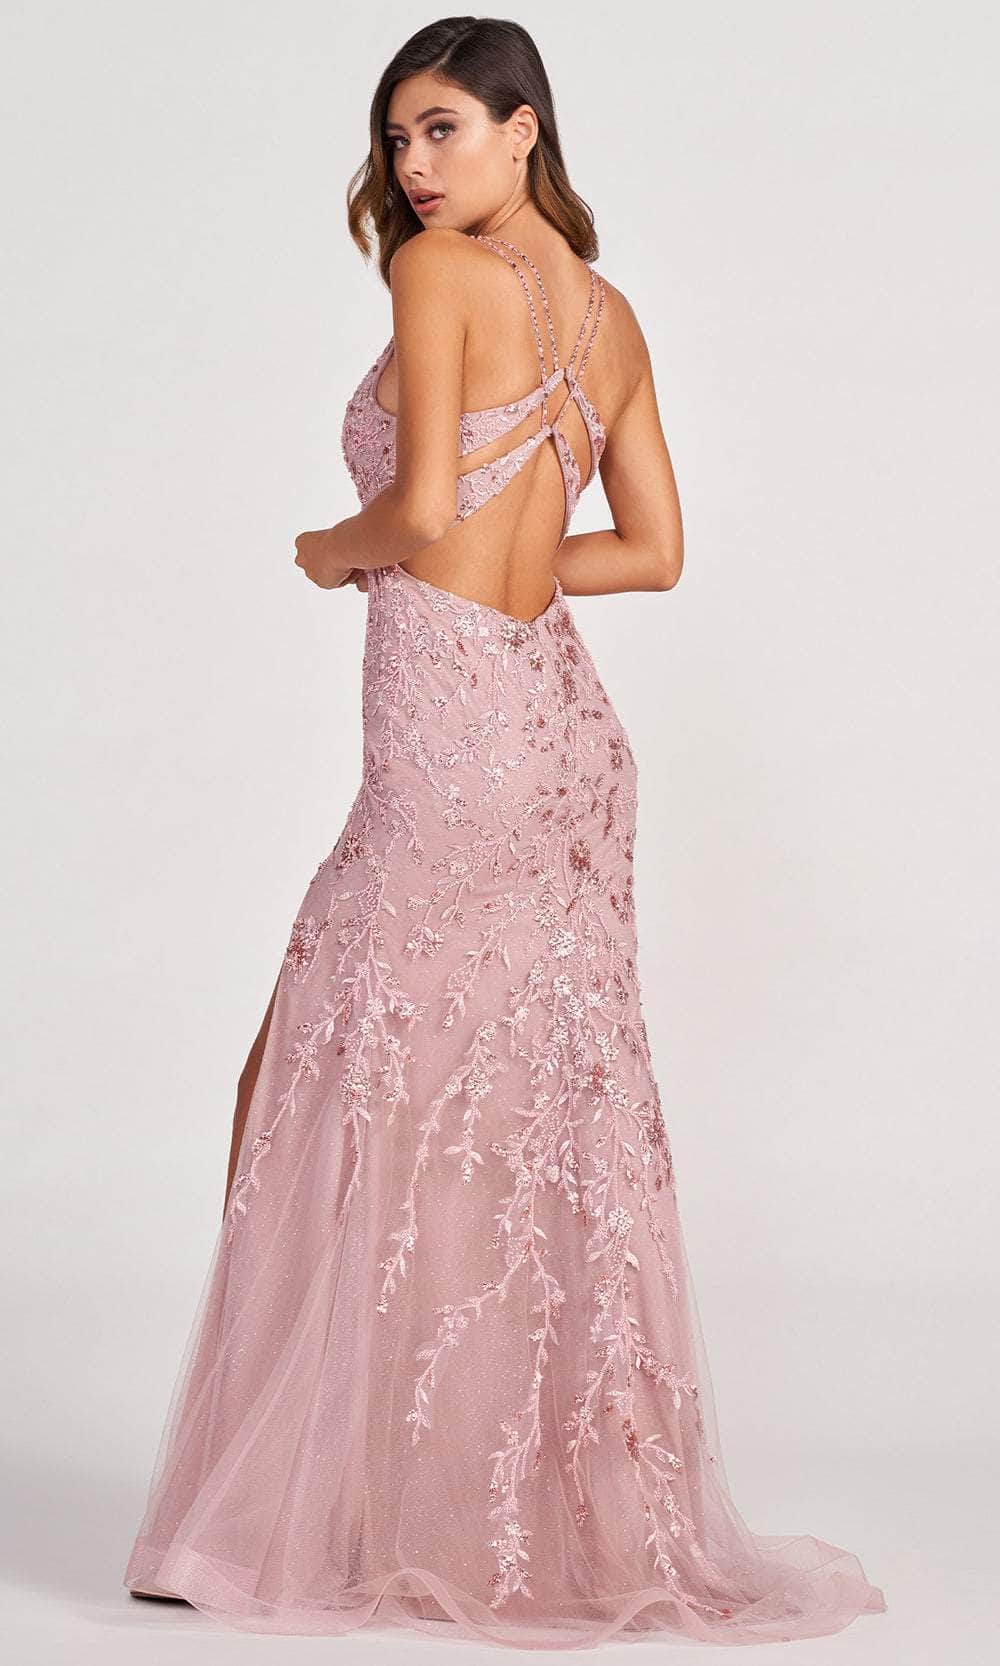 Colette By Daphne CL2015 - Beaded Mermaid Evening Dress Prom Dresses